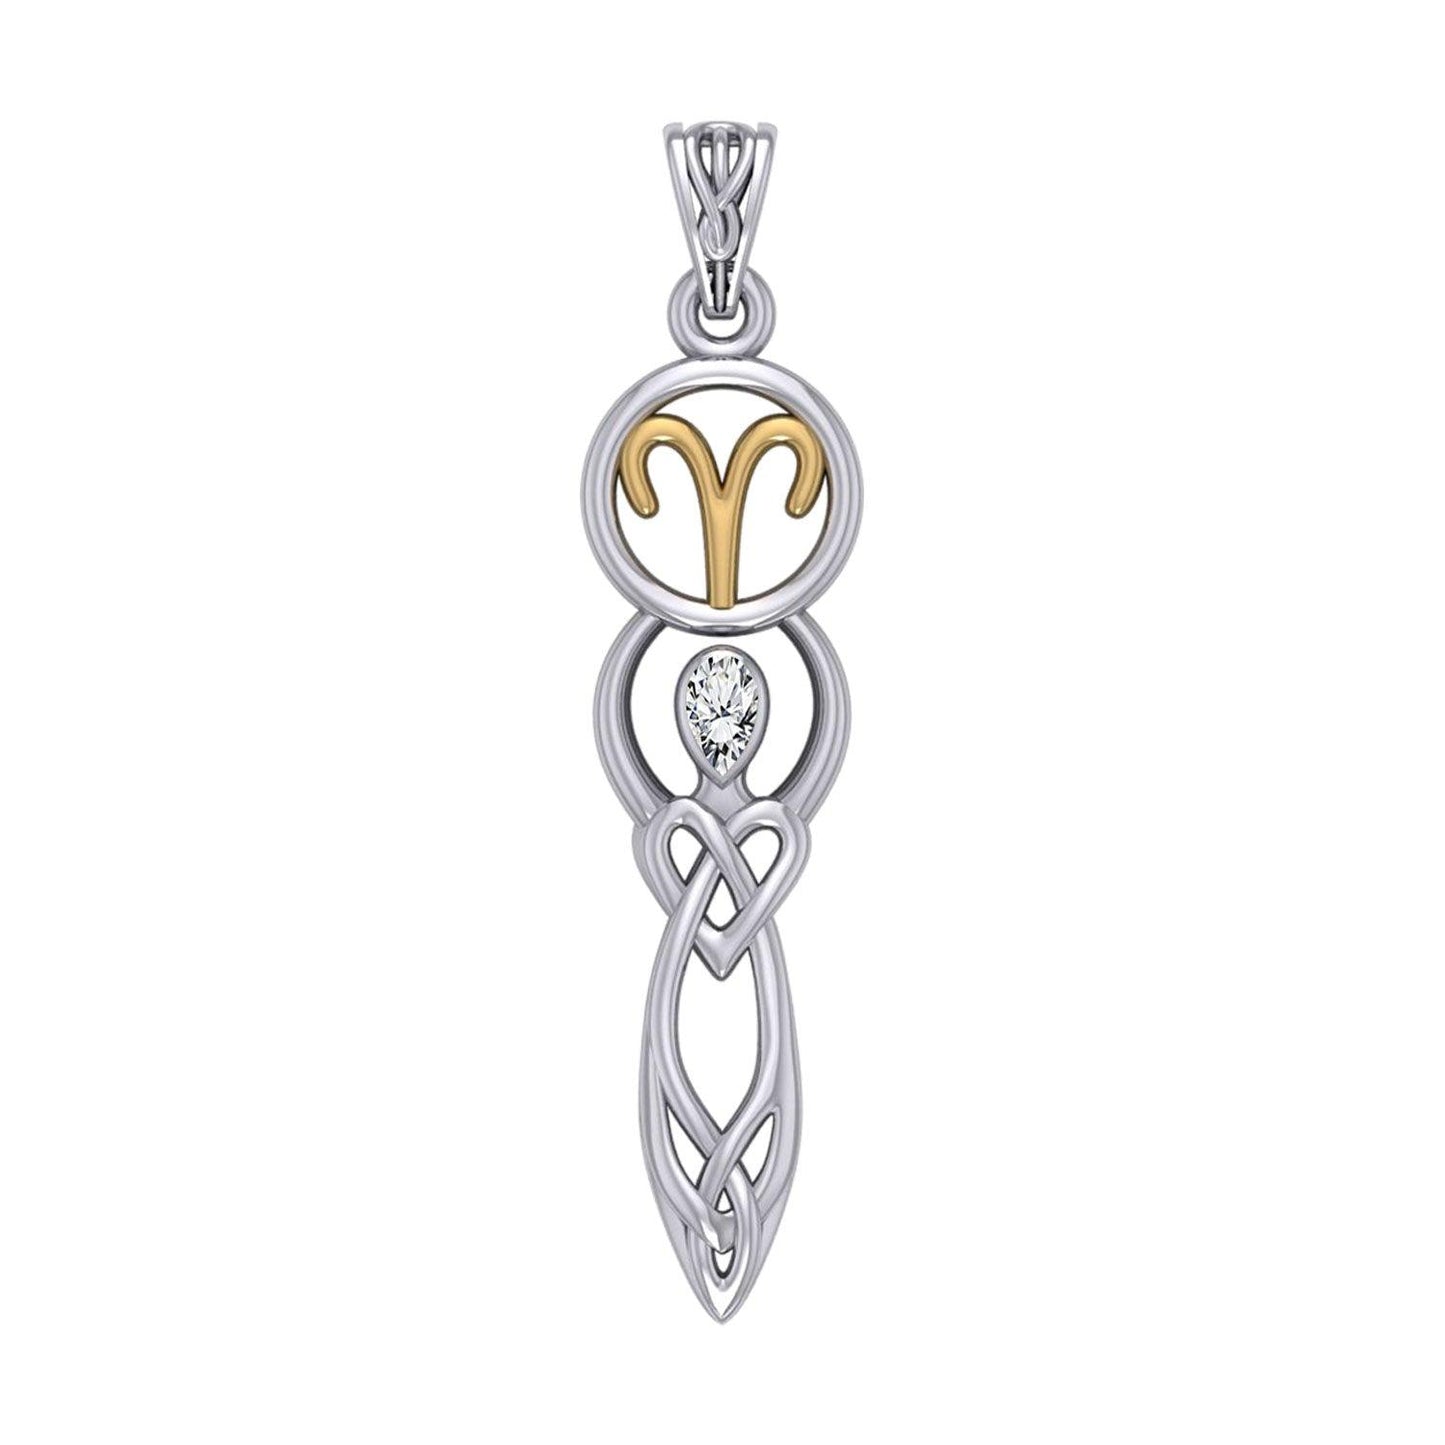 Celtic Goddess Aries Astrology Zodiac Sign Silver and Gold Accents Pendant with White Stone MPD5935 - peterstone.dropshipping